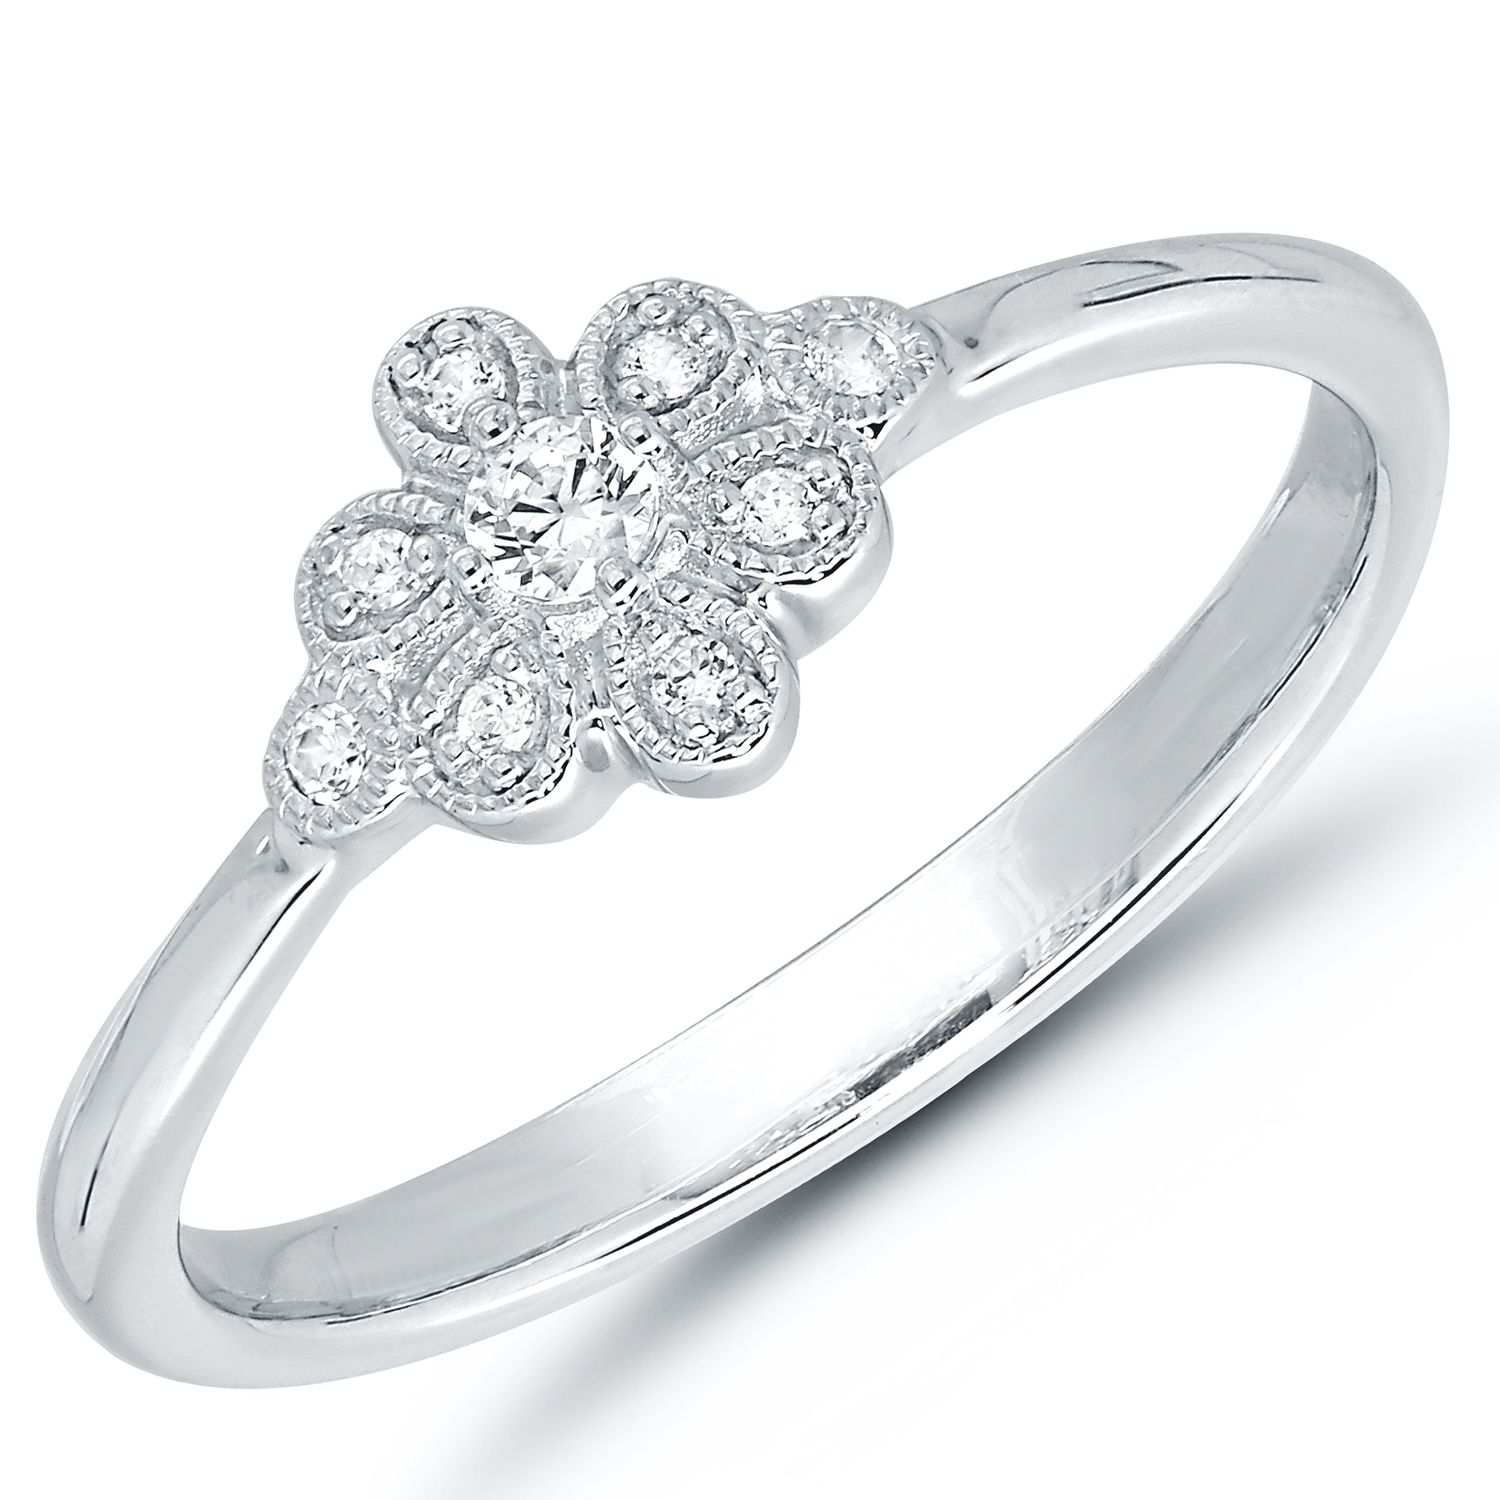 Bridal ring set with rose flower and diamonds / Blooming Rose | Eden Garden  Jewelry™